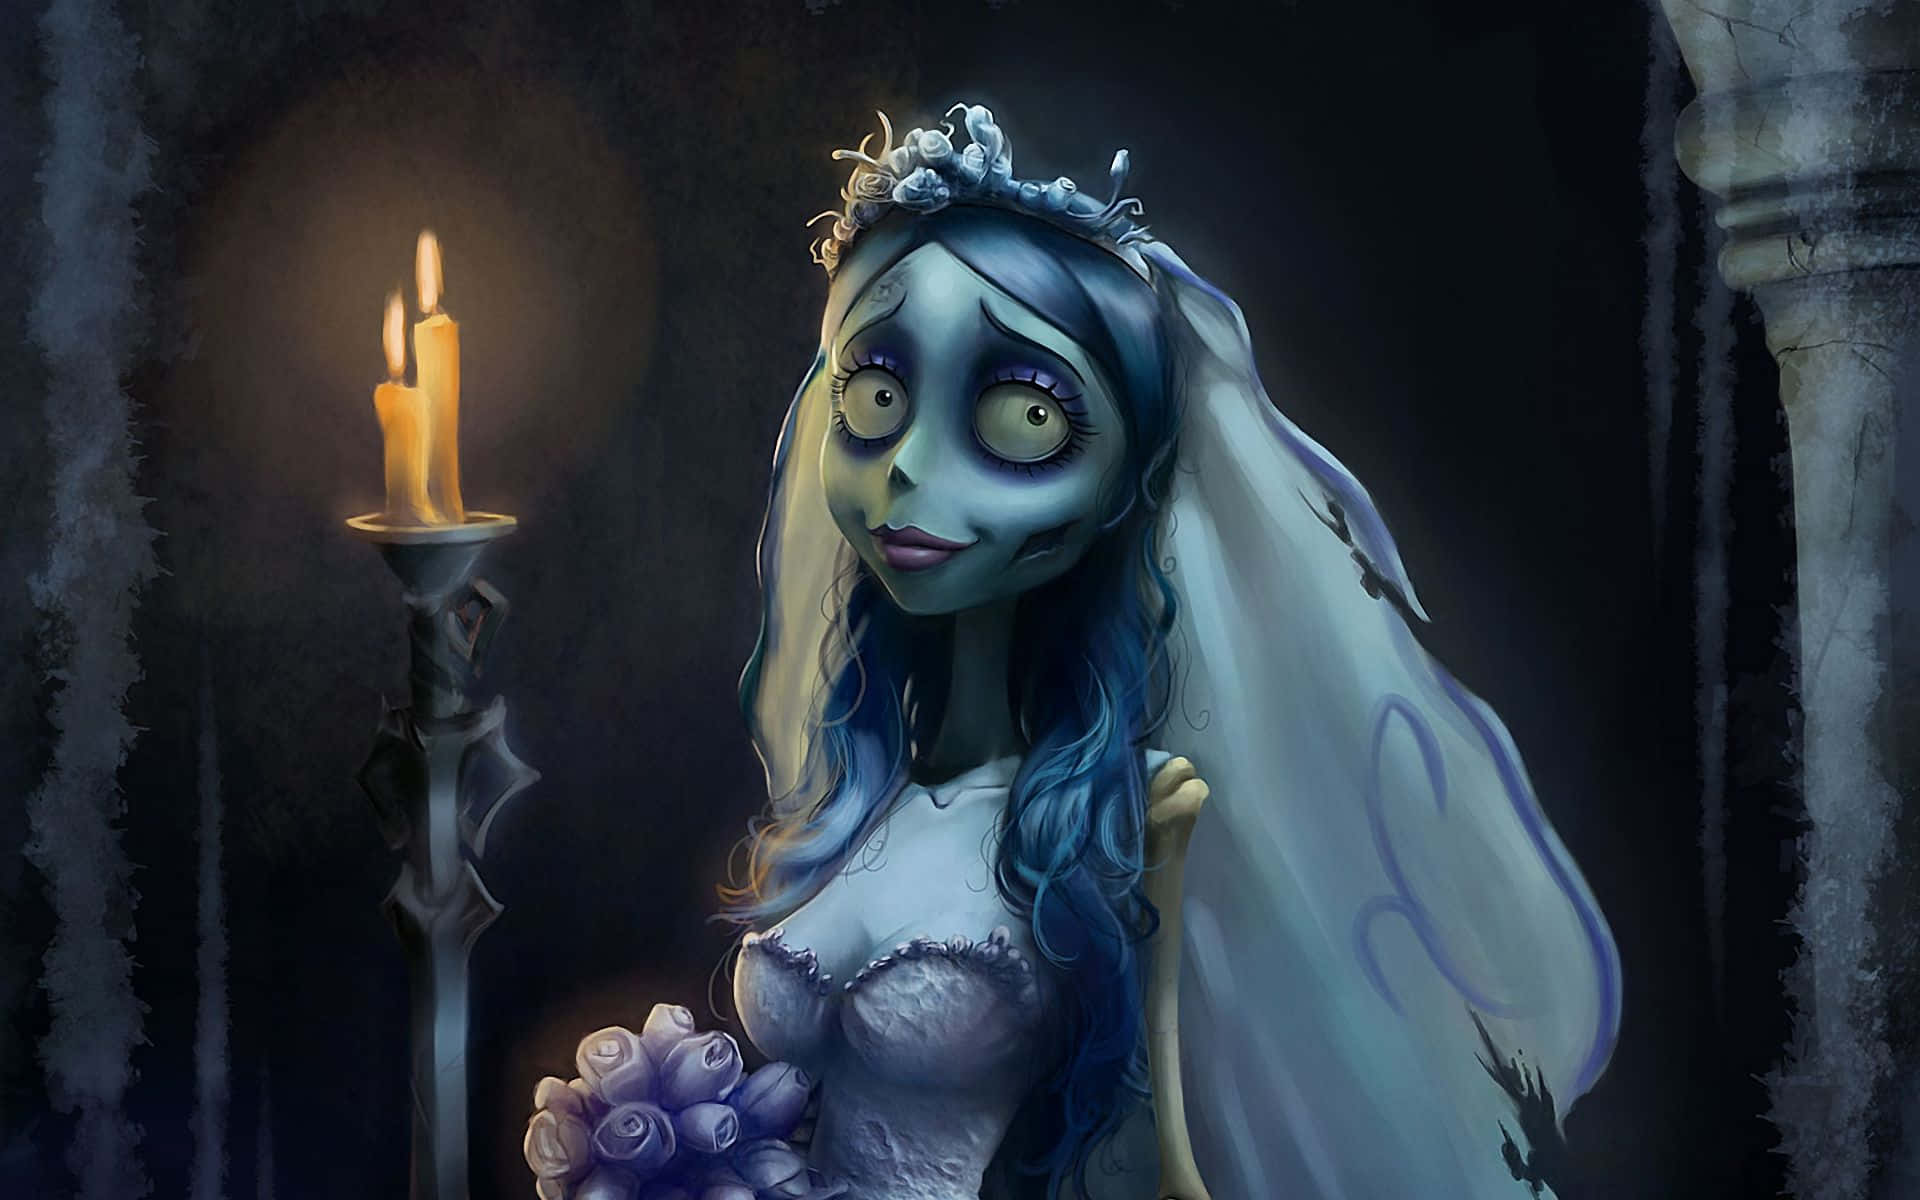 Enchanting Corpse Bride and Groom in a Magical Moment